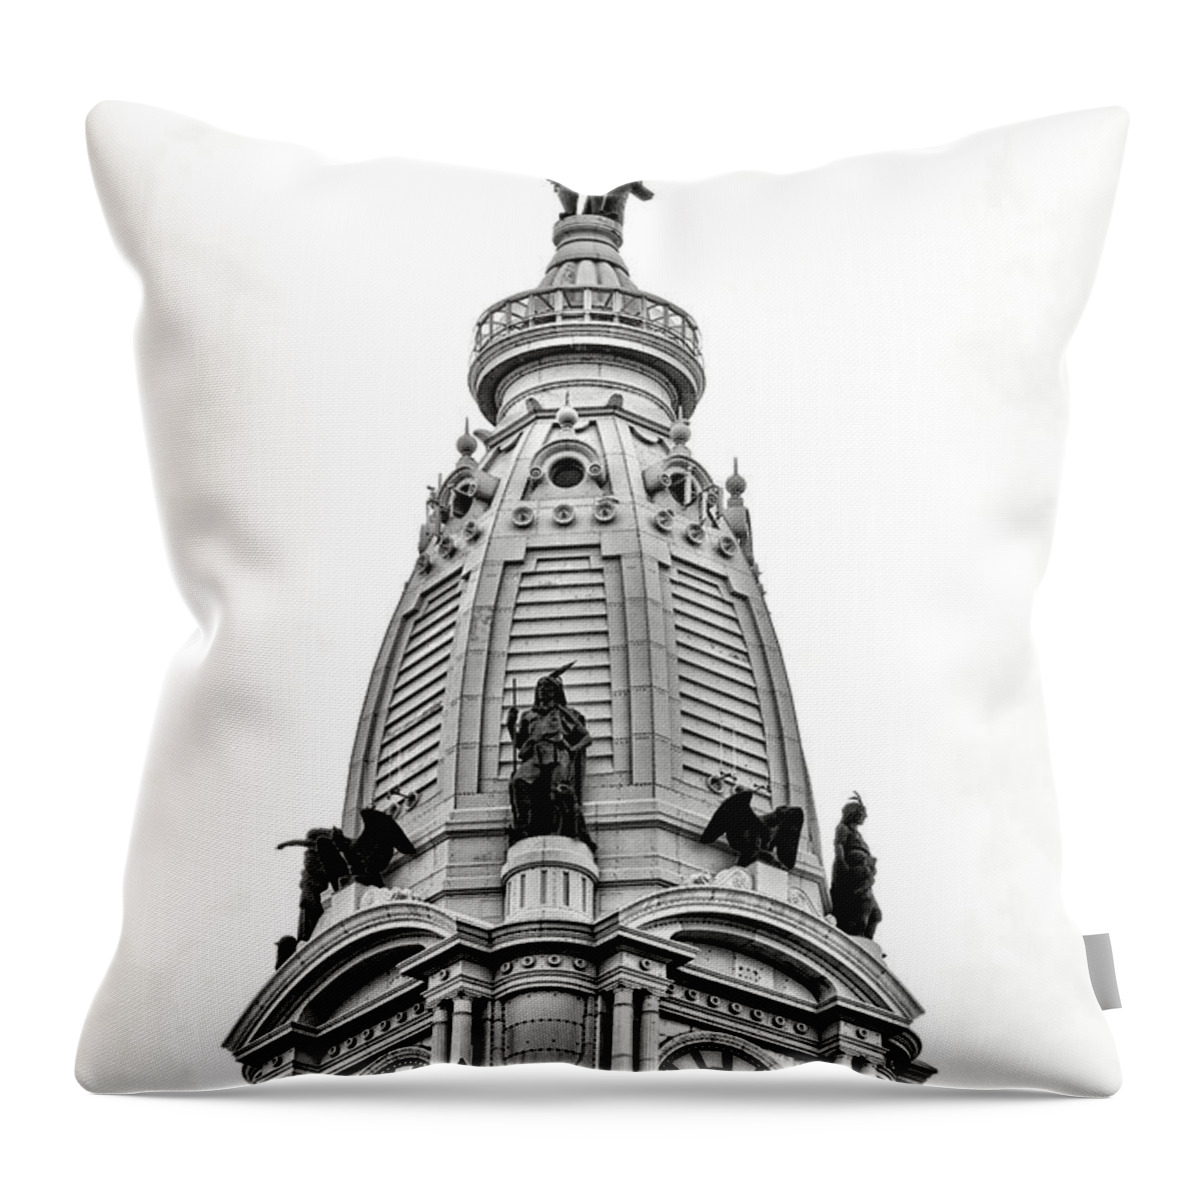 William Throw Pillow featuring the photograph William Penn Statue atop Philadelphia City Hall by Olivier Le Queinec